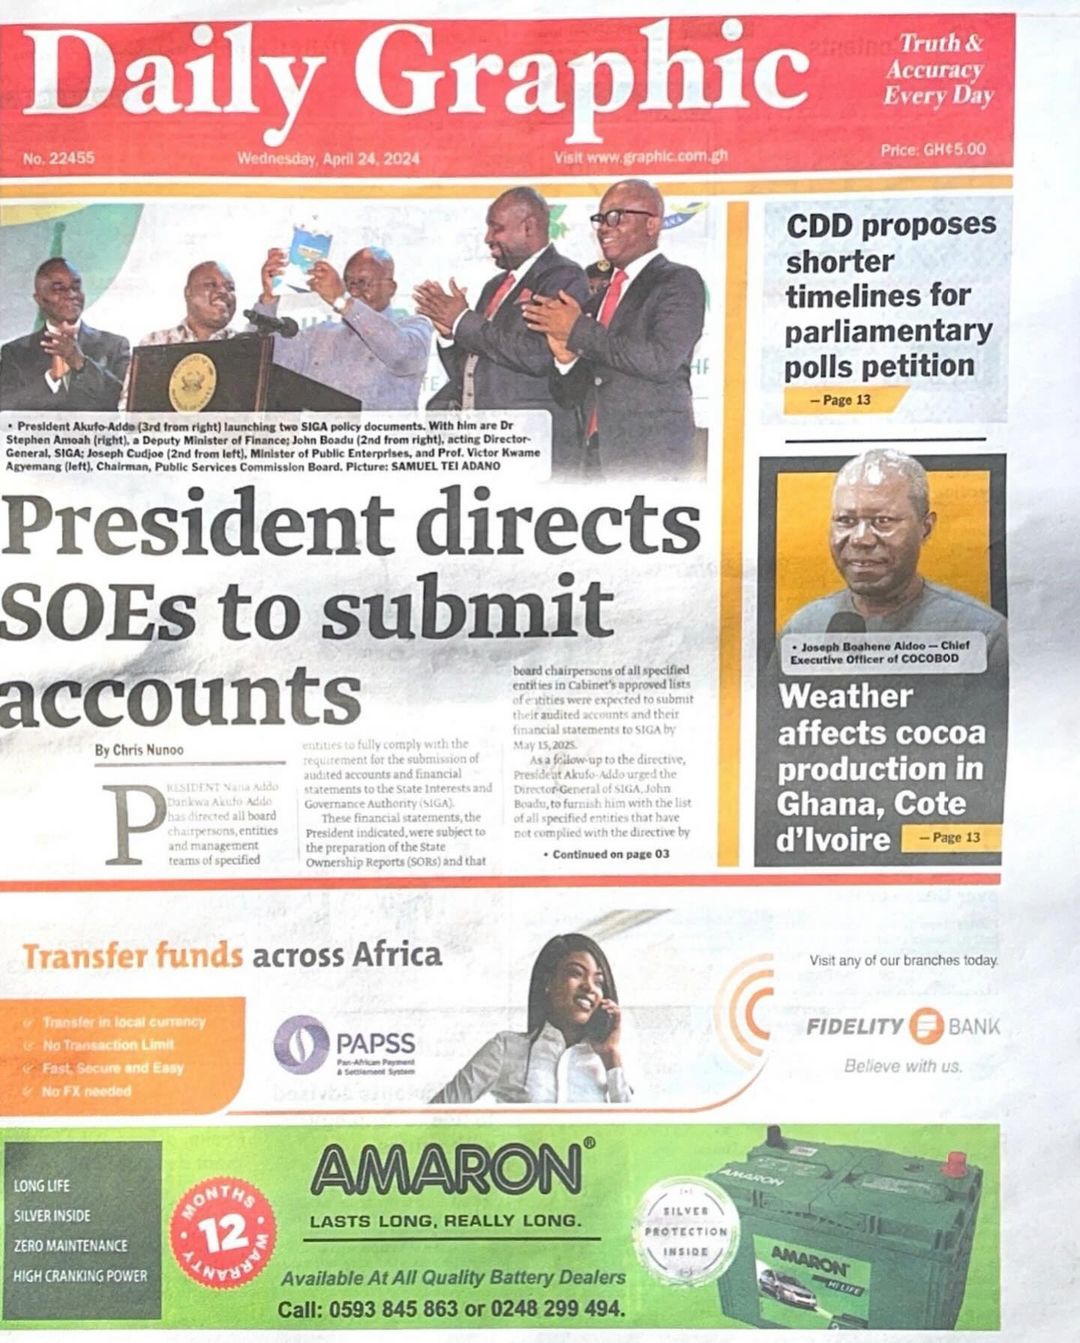 Daily Graphic Newspaper - April 24, 2024